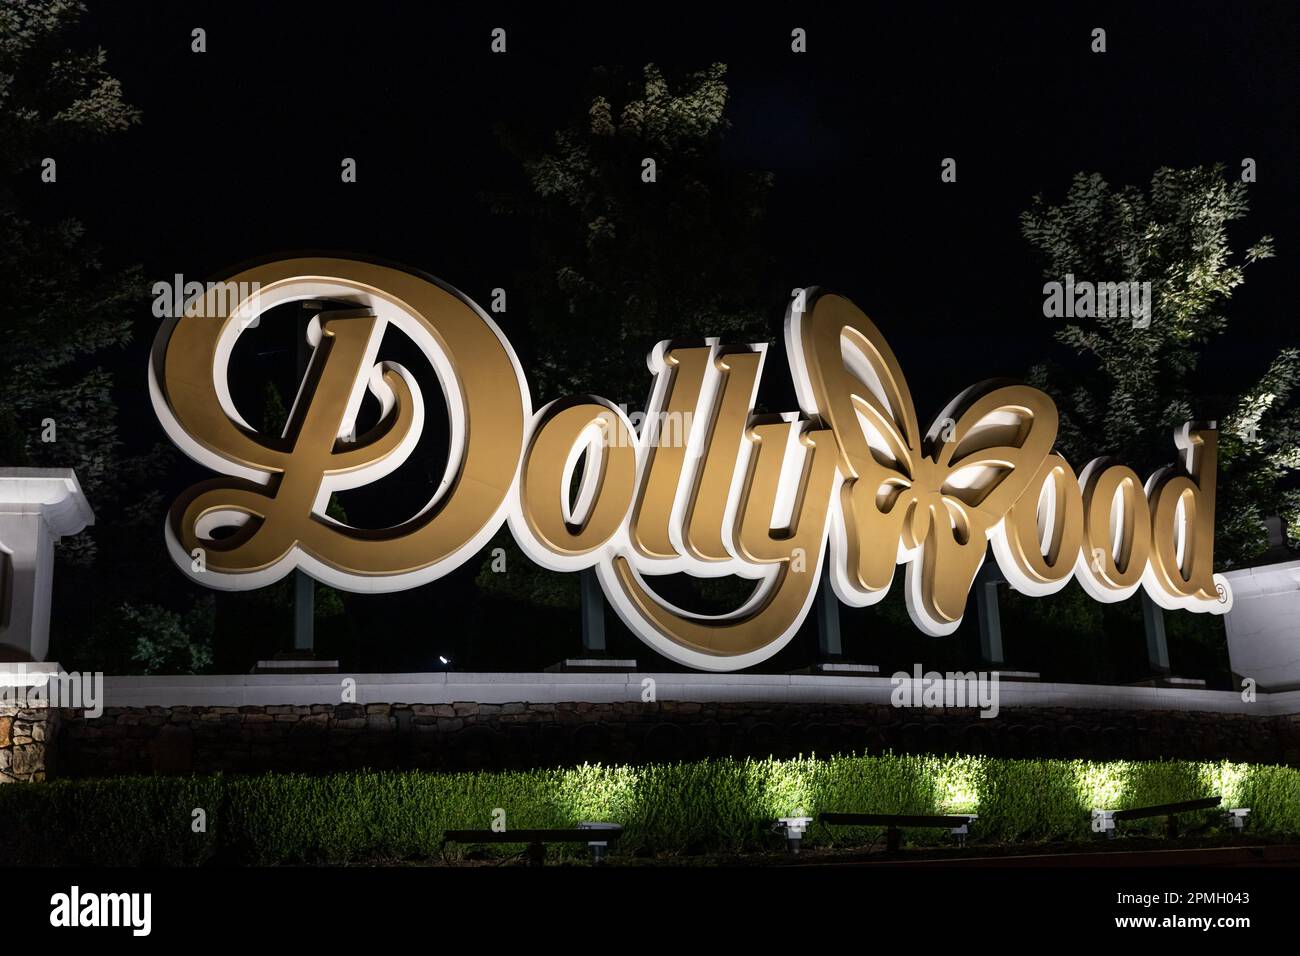 The entrance to Dollywood with the amusement park logo. Dollywood is Dolly Parton's famous amusement park located in the Smoky Mountains. Stock Photo